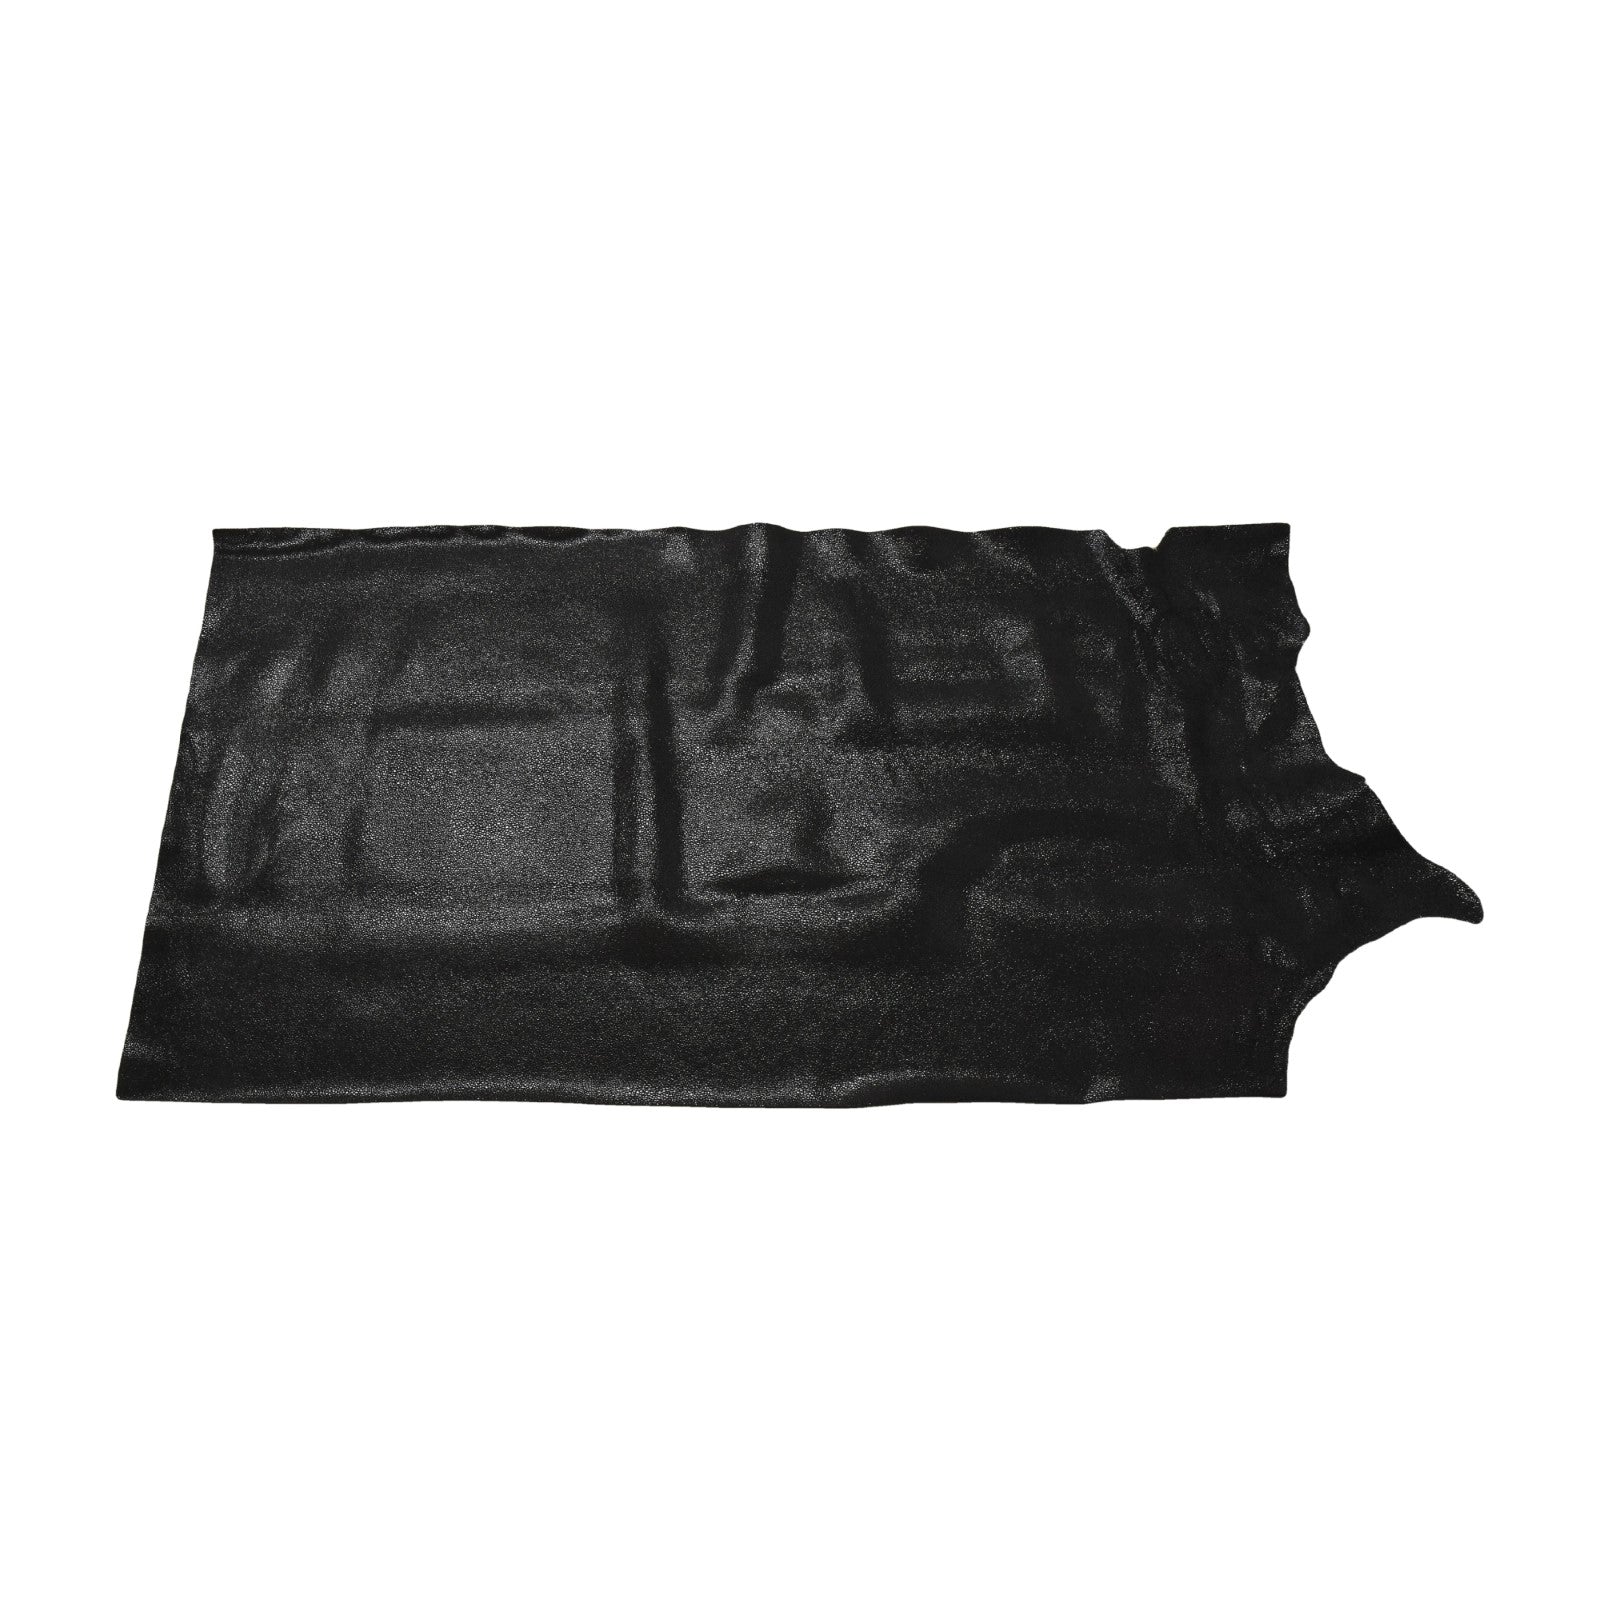 Metallic Black Sizzling Stingray 2-3 oz Cow Hides, 6.5-7.5 Sq Ft / Project Piece (Middle) | The Leather Guy